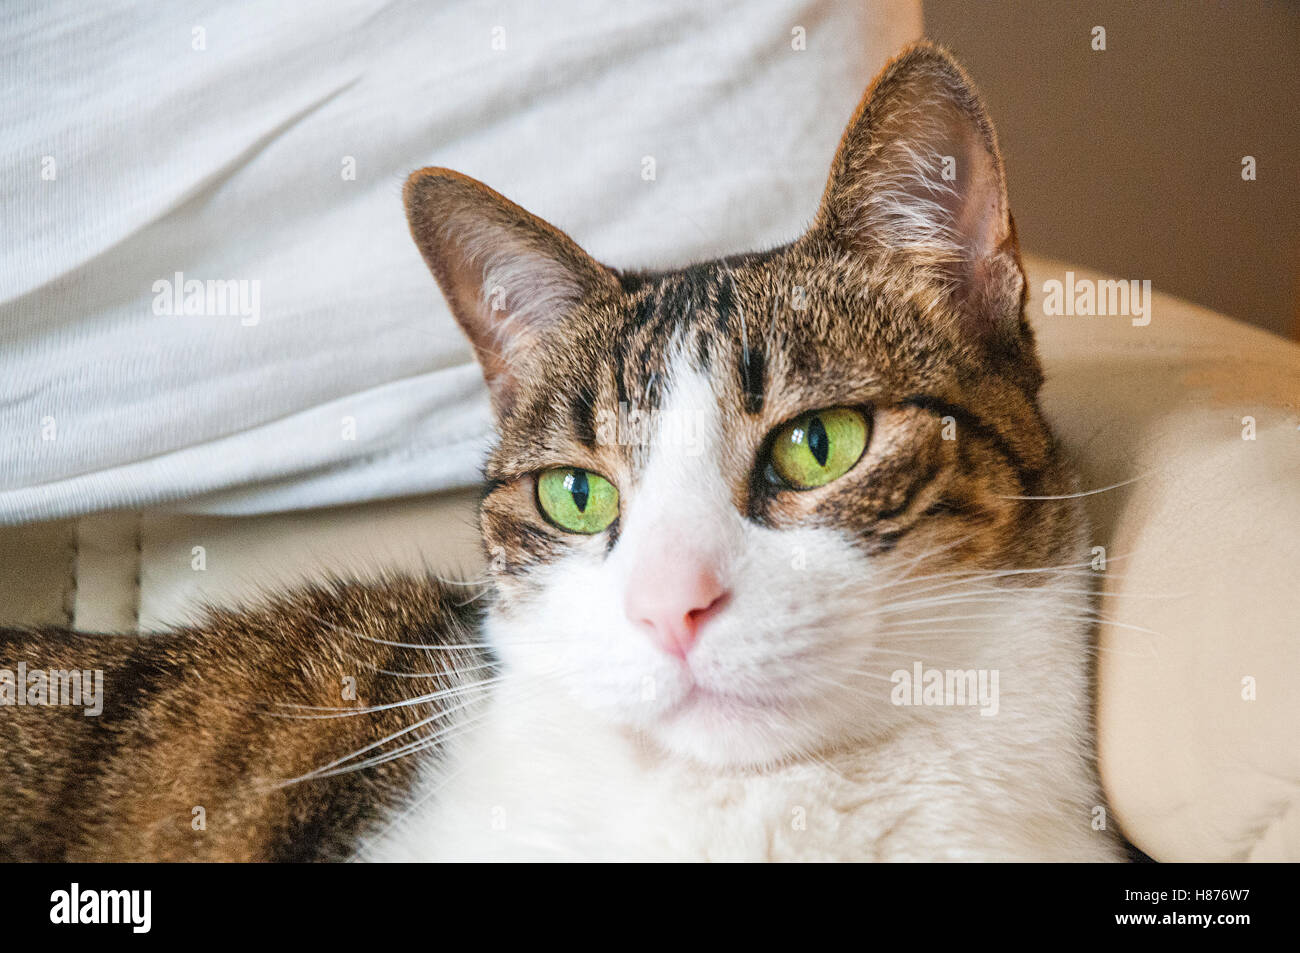 Relaxed tabby and white cat. Close view. Stock Photo